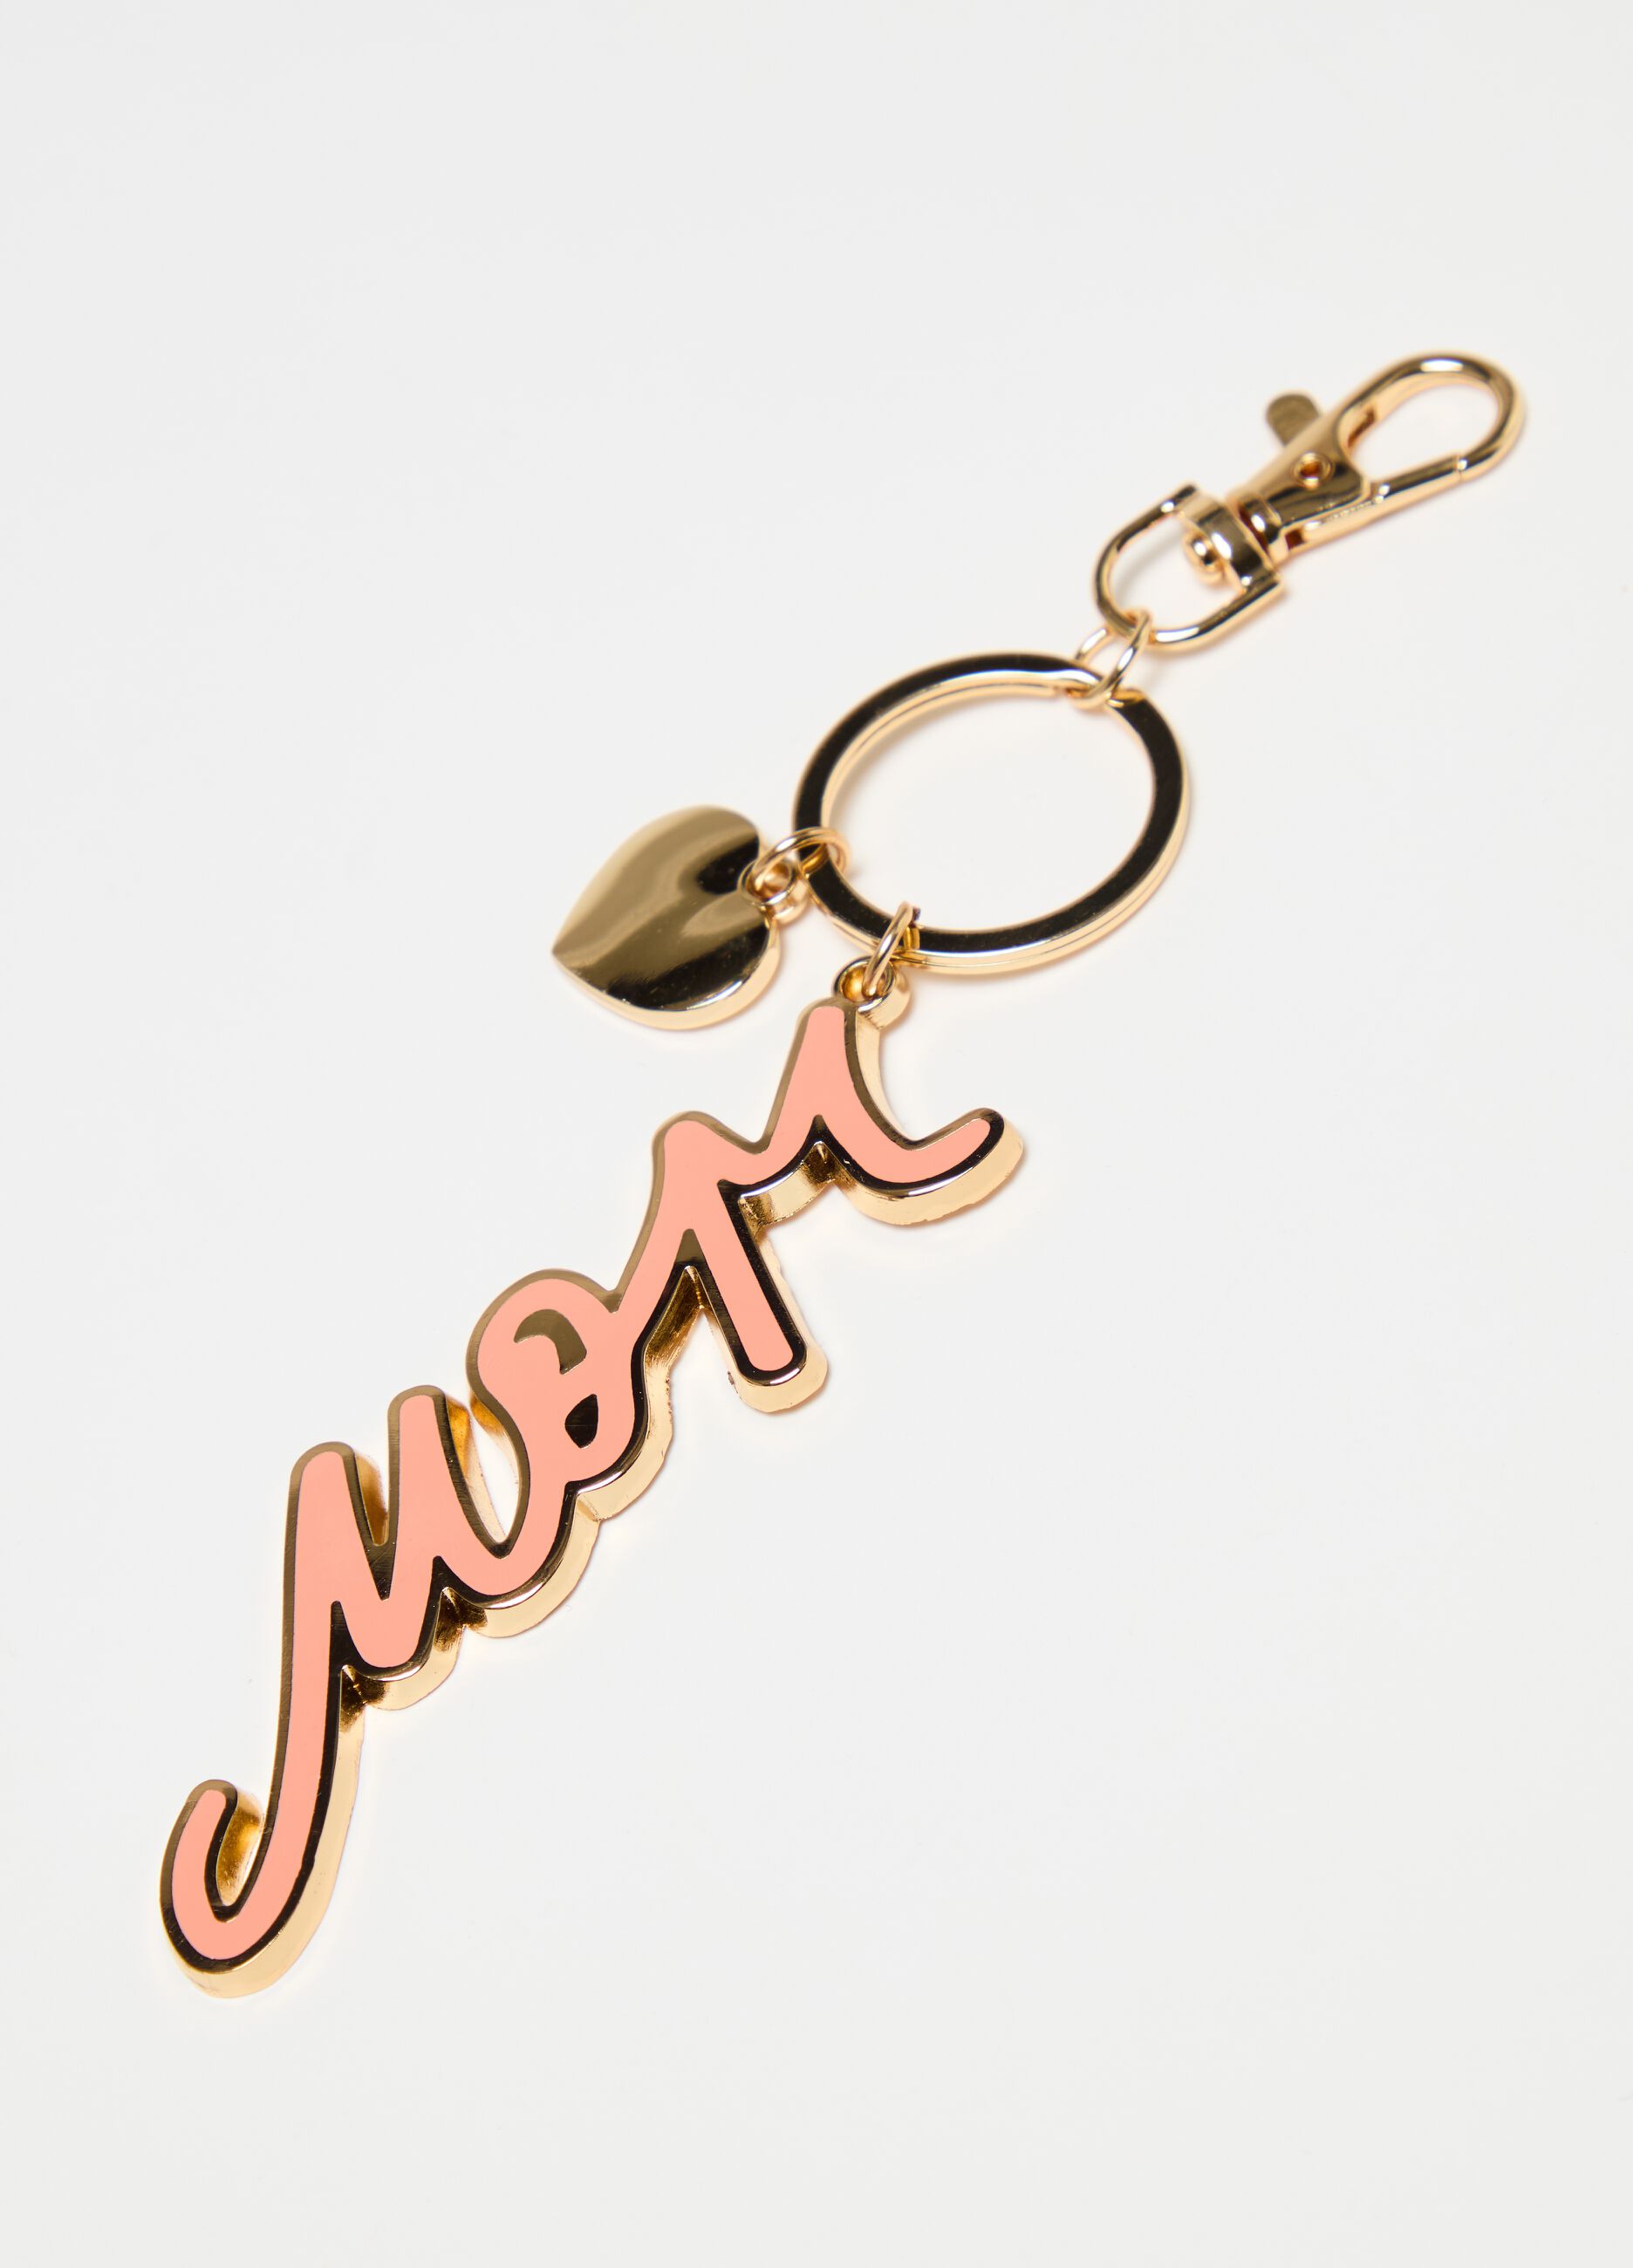 Keyring with enamel lettering and heart